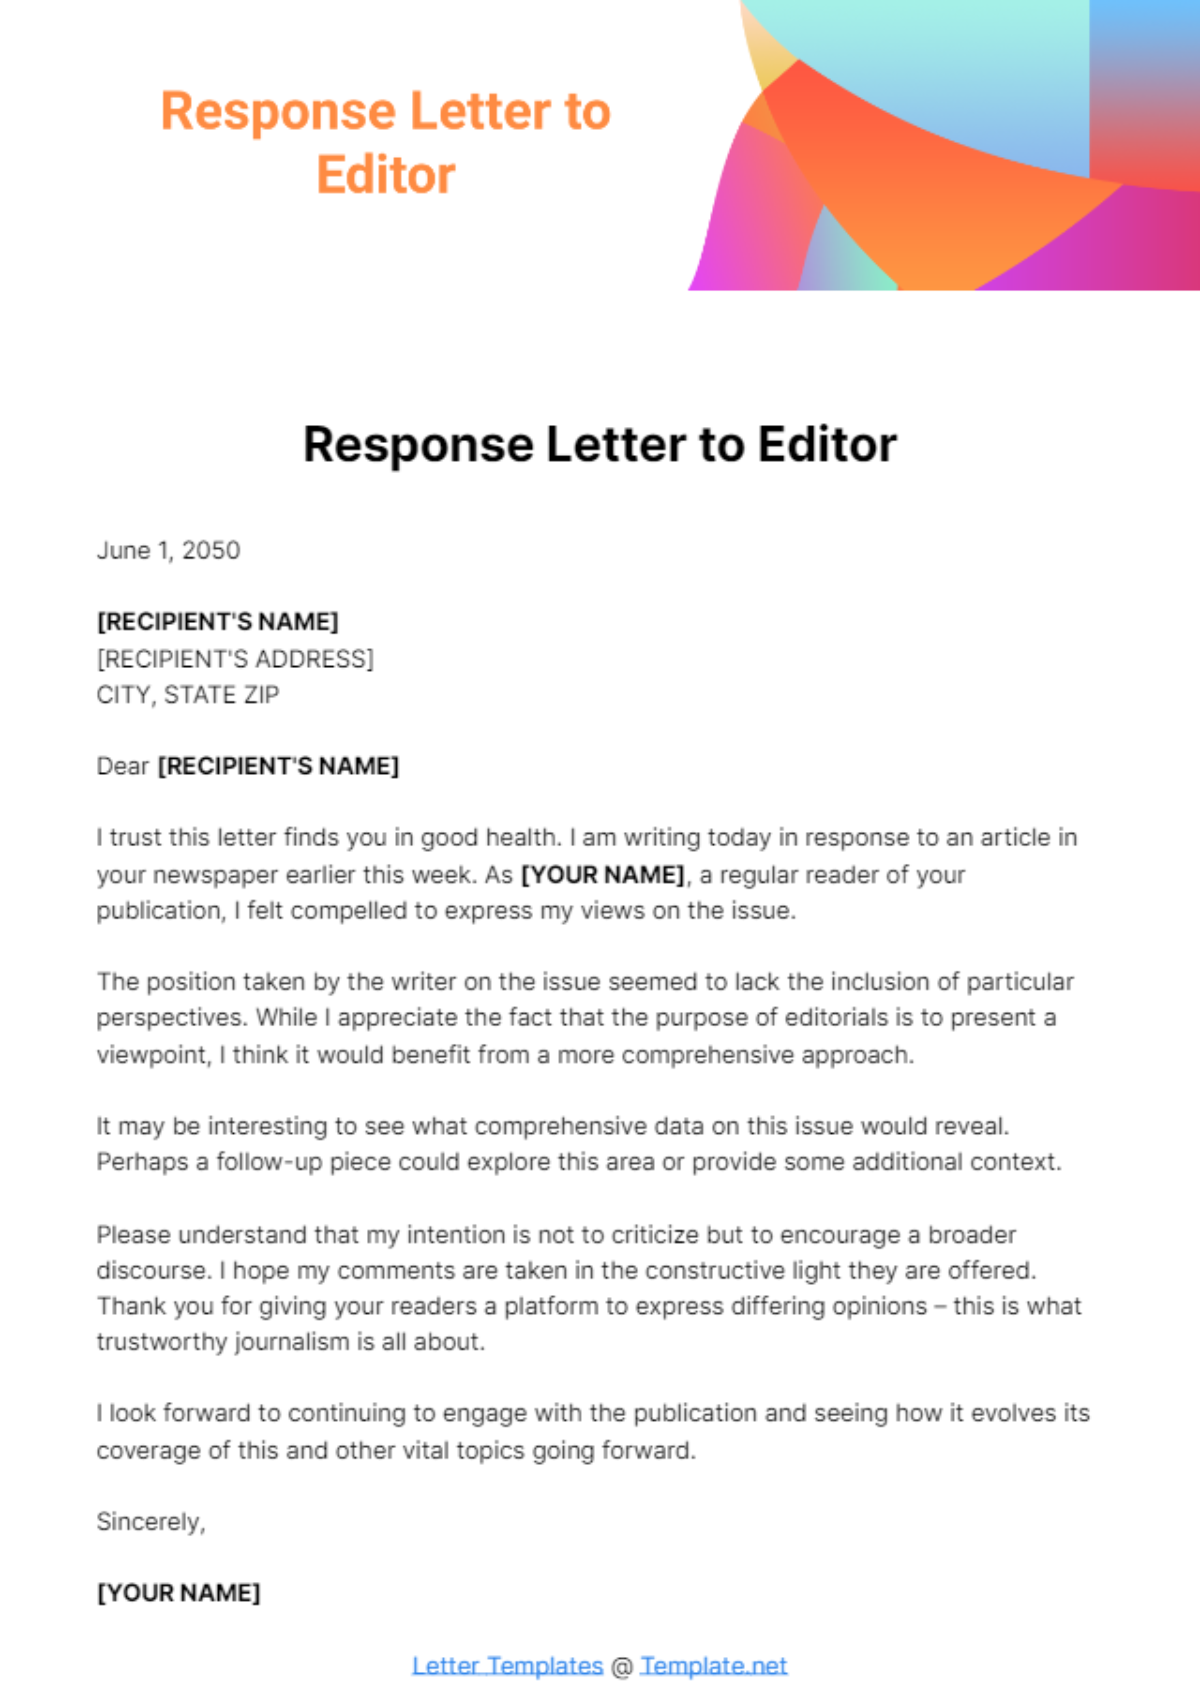 Free Response Letter to Editor Template